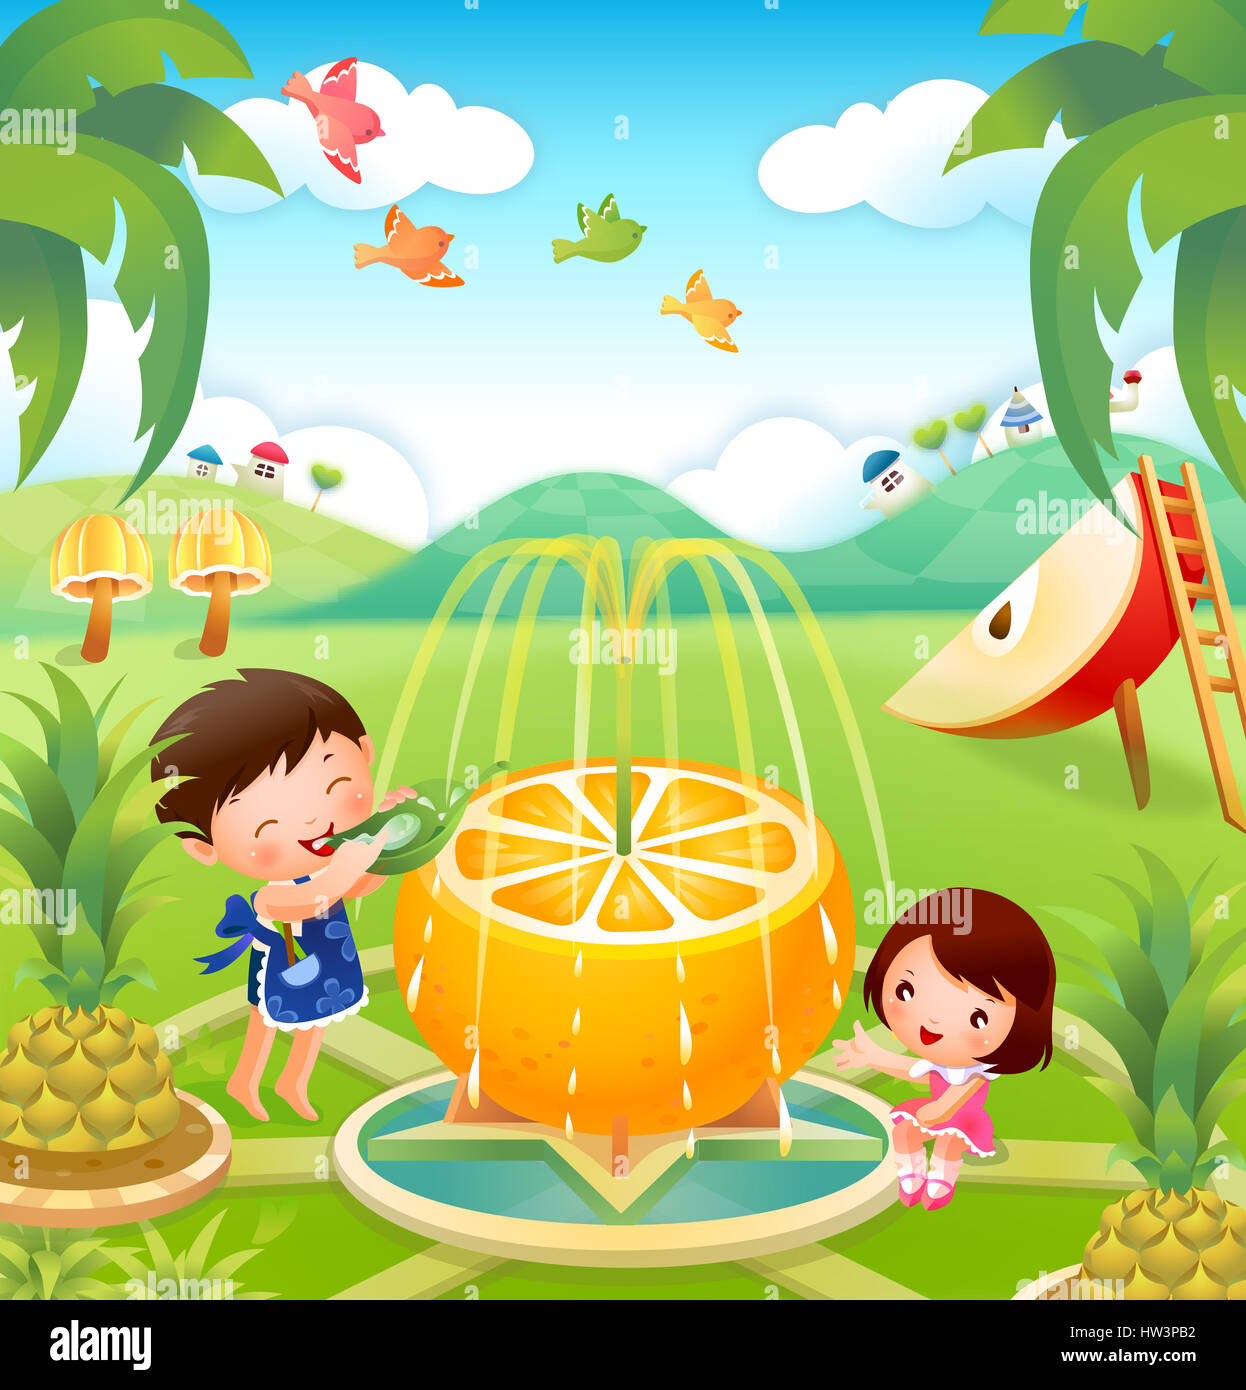 apple,banana leaf,bird,avian,boys,boy,male,brown hair,cartoon,casual clothing,clipart,cloud,color,colour,color image,computer graphics,day,digitally generated image,enjoyment,flying,fountain,frock,fruit,nutrition,nutritious,organic,full length,girls,girl,child,kid,female,graphics,grass,house,illustration,ladder,leaf,mushroom,orange,outdoors,park,pineapple,playful,playing,rolling landscape,side Stock Photo